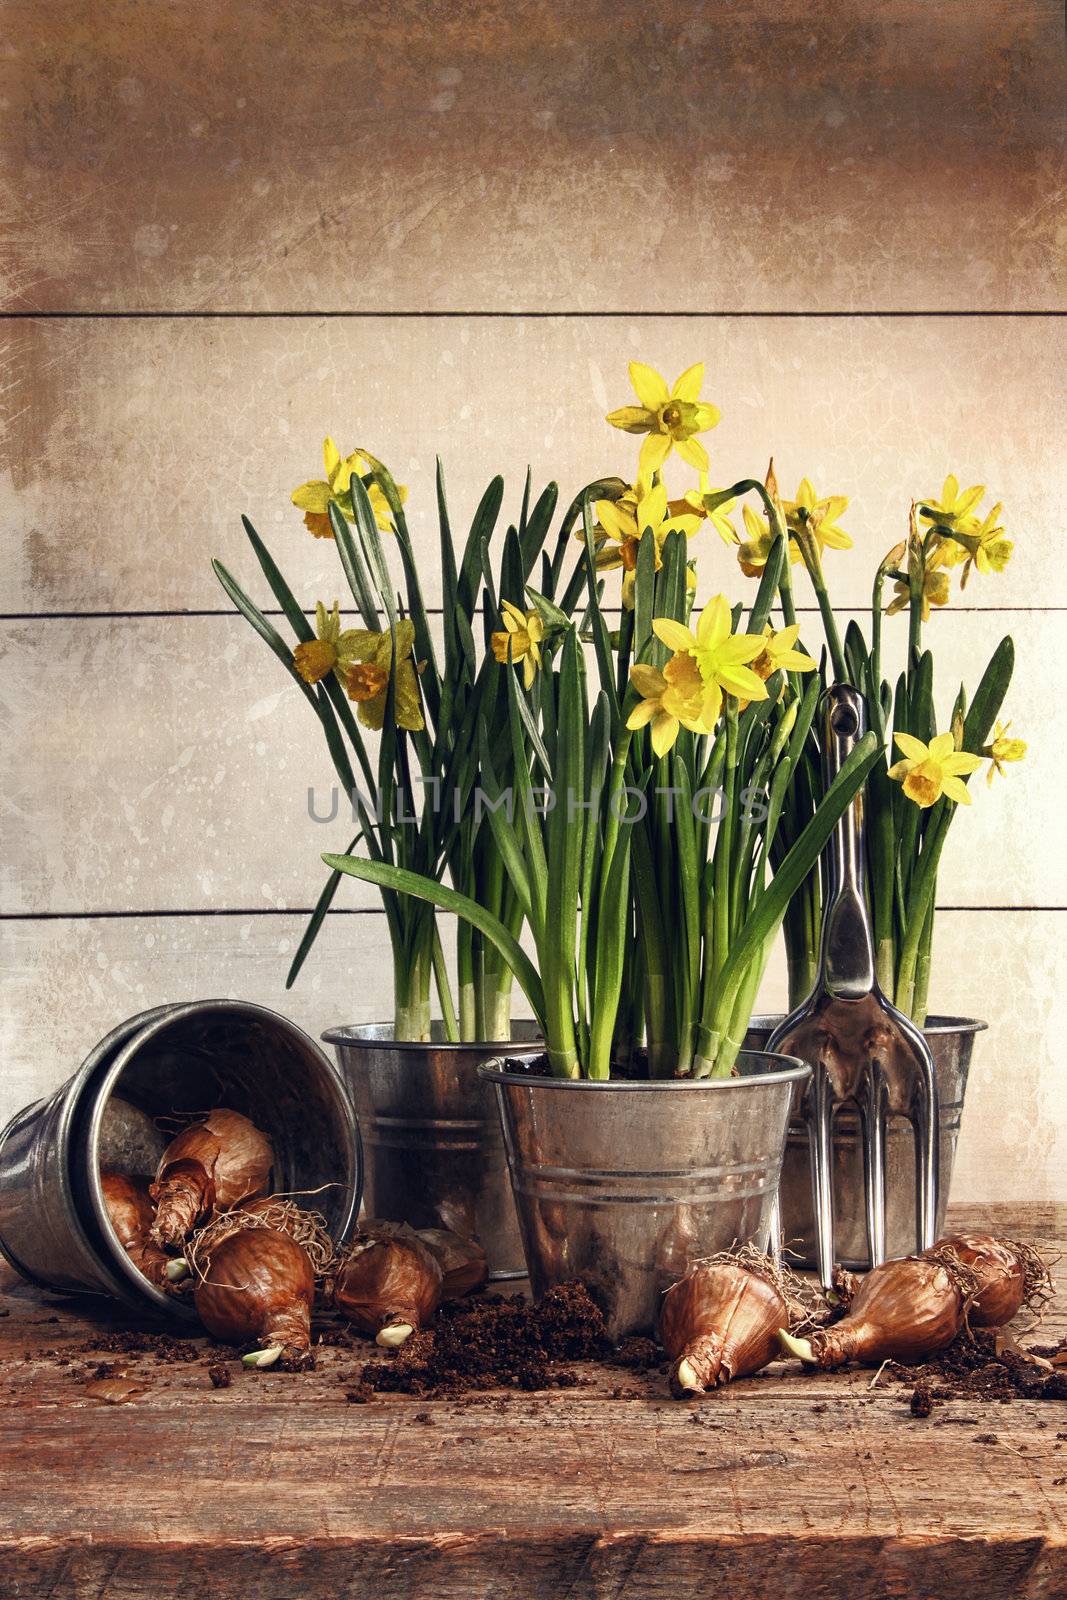 Potted daffodils wirh bulbs for planting by Sandralise